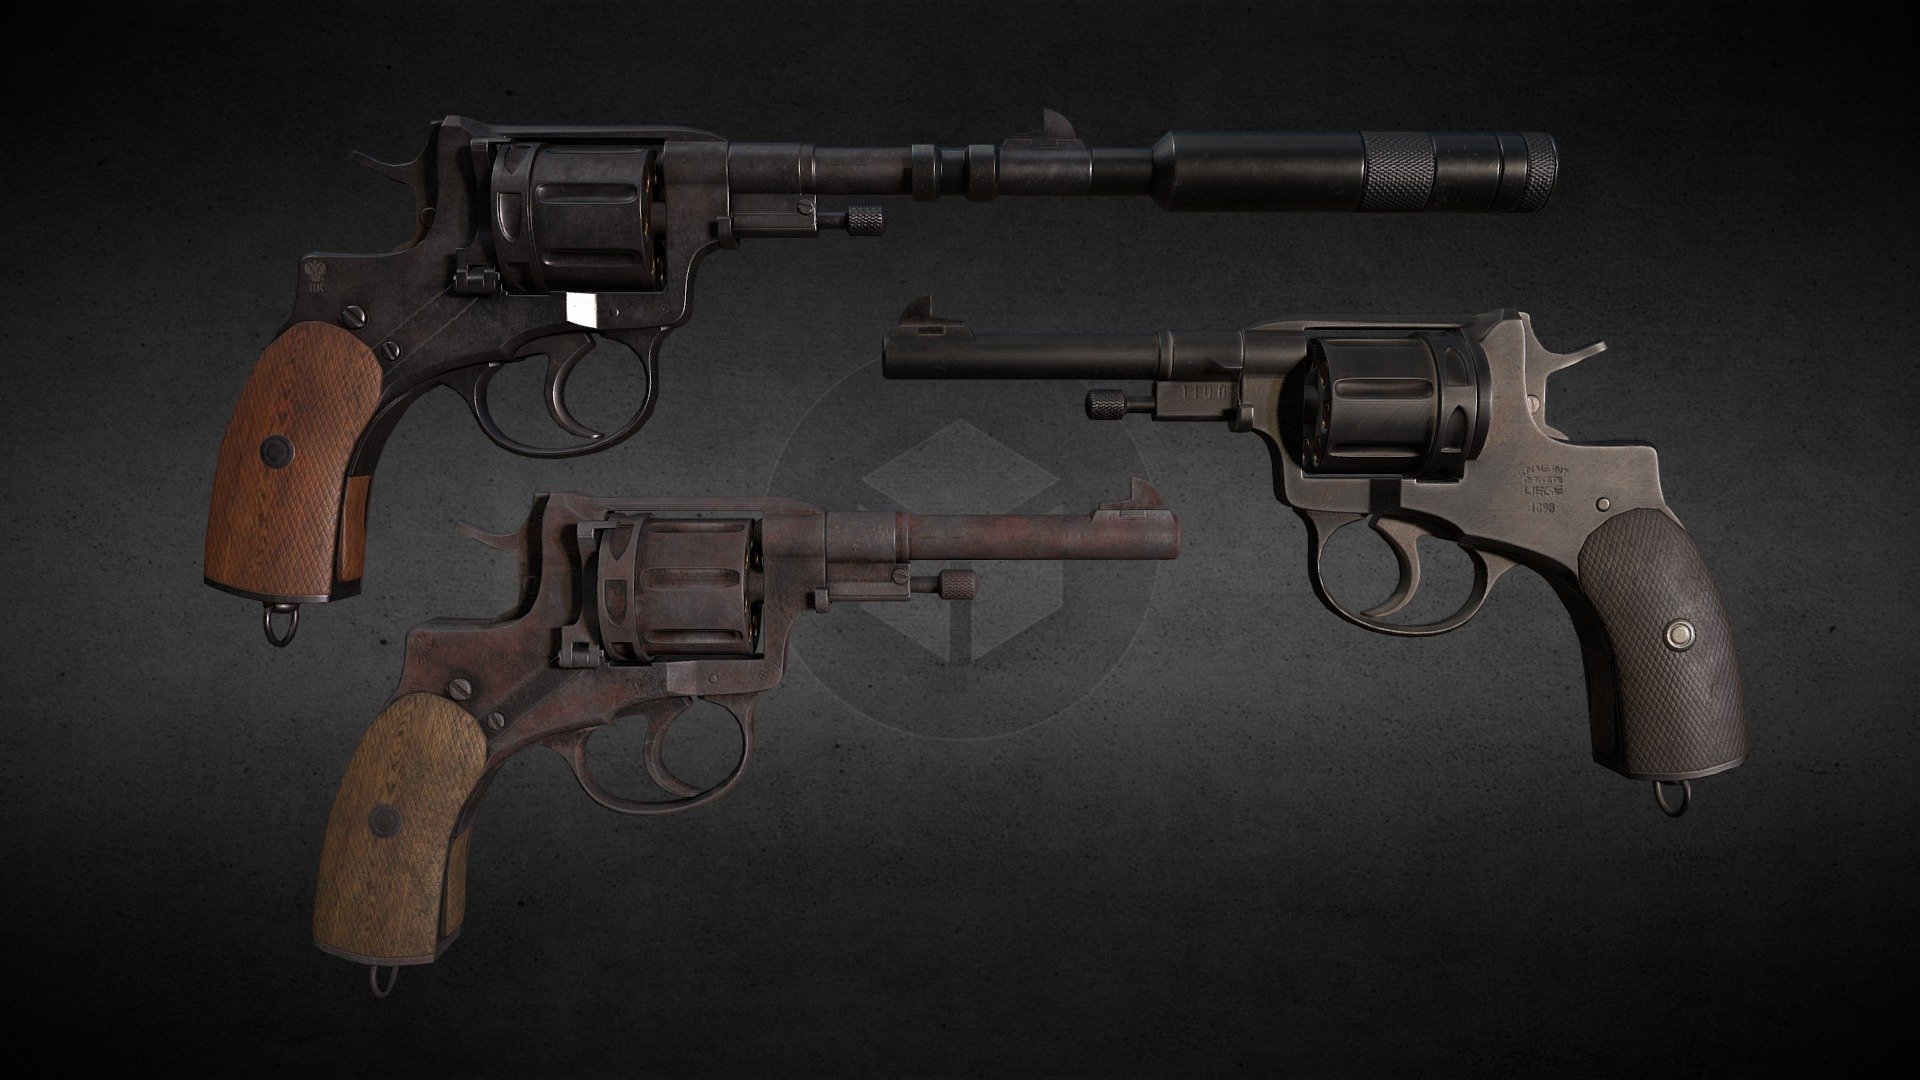 Artstation Post: https://www.artstation.com/artwork/rwPyO

A lowpoly PBR Russian 1898 Nagant revolver with silencer and bullets, with three texture variations. The model is split into separate parts with proper hierarchy, ready to be rigged and animated.

Full model and 4k textures are in the additional files archive.

Model Parts:





Frame: 2928 tris, 1565 verts;




Barrel: 1396 tris, 686 verts;




Lever: 358 tris, 190 verts;




Hammer: 322 tris, 168 verts;




Trigger: 174 tris, 90 verts;




Ejector Housing: 249 tris, 156 verts;




Ejector: 190 tris, 97 verts;




Silencer: 504 tris, 252 verts;




Shell: 468 tris, 238 verts;




Bullet: 192 tris, 98 verts



Texture Sets:
- Bullet Texture (1024x1024)





Light Nagant Texture (4098x4098)




Dark Nagant Texture (4098x4098)




Rusty Nagant Texture (4098x4098)



Texture Types:





Ambient Occolusion




Base Color




Glossiness




Metallic




Metallic Roughness (Unity)




Normal (OpenGL)




Normal (DirectX)




Roughness




Specular


 - Nagant Revolver - 3D model by soidev 3d model